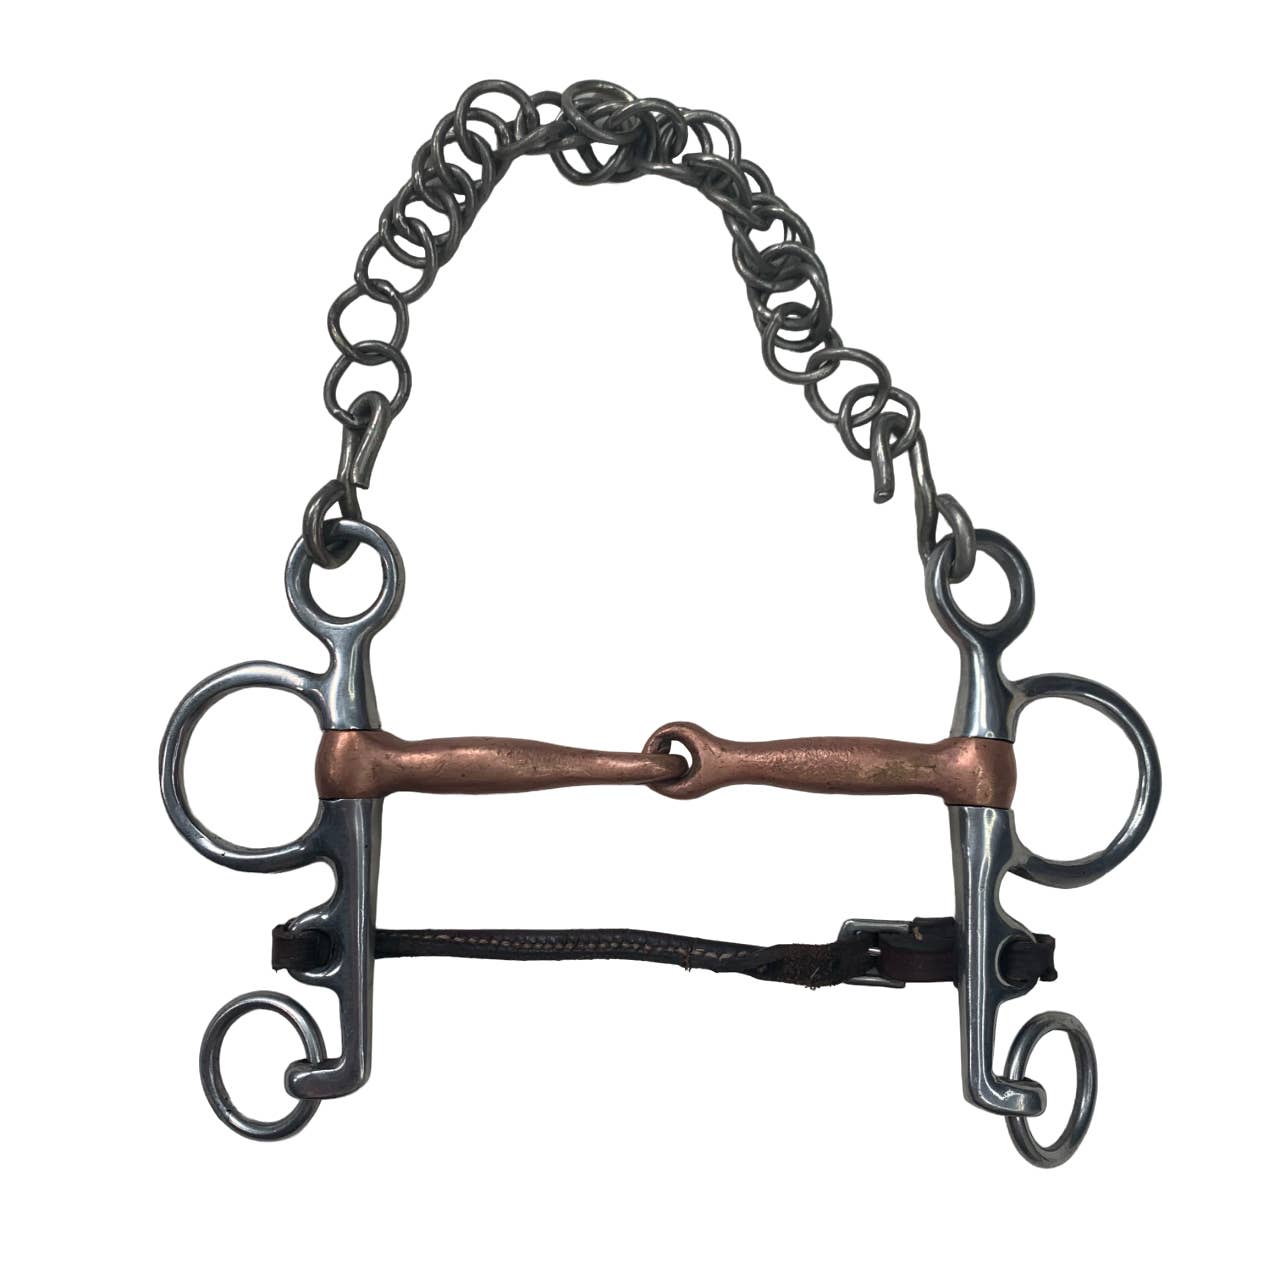 Jointed Pelham Snaffle in Copper - 5 1/4"